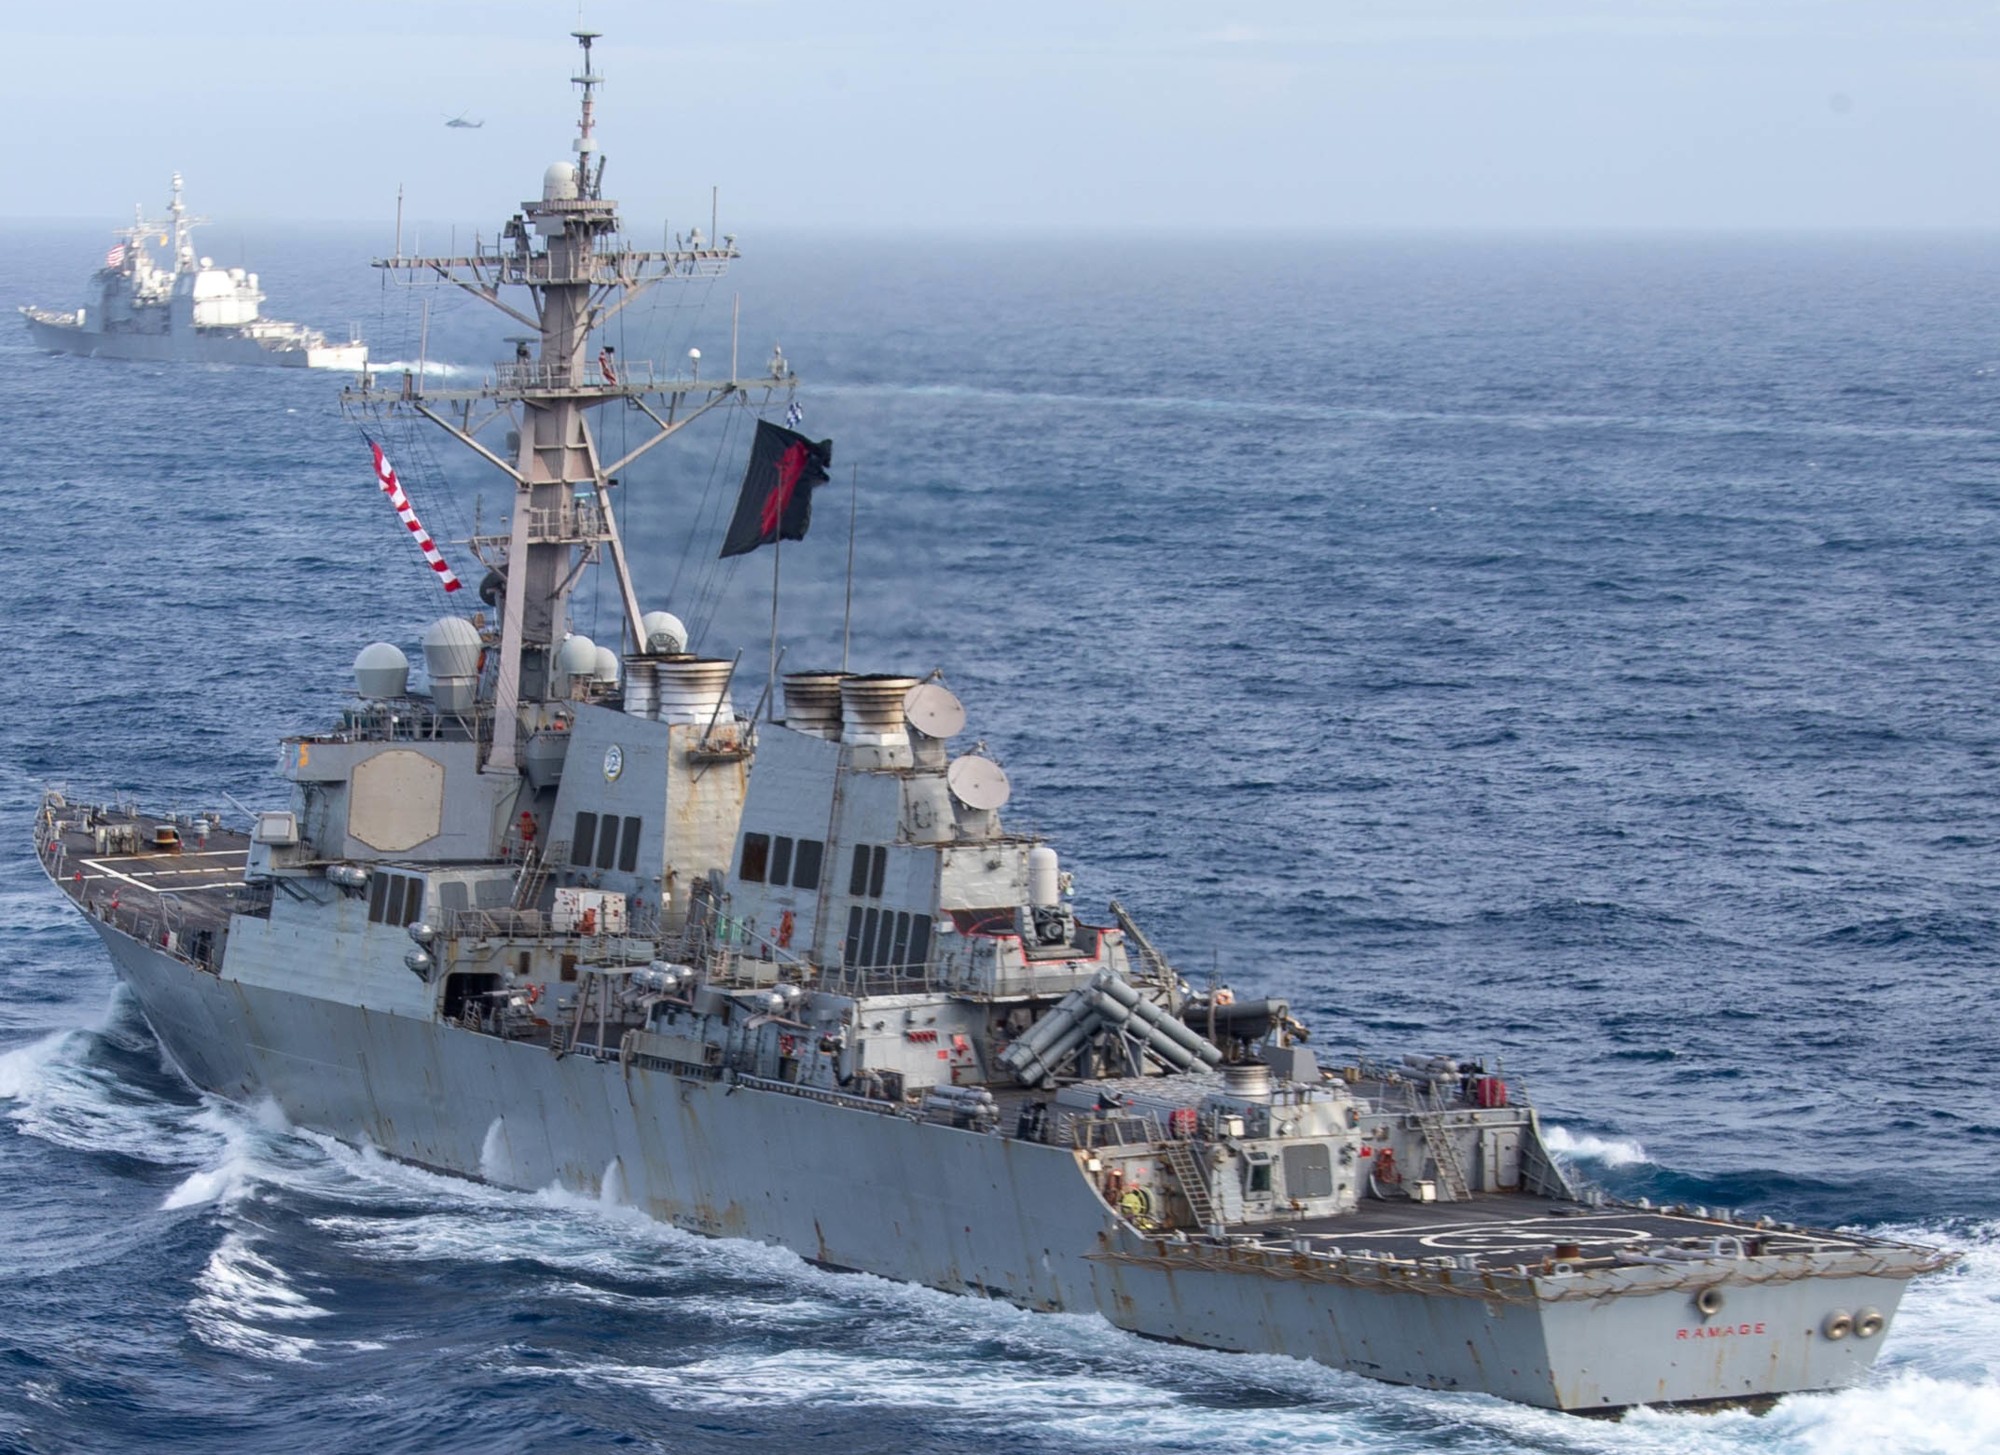 ddg-61 uss ramage guided missile destroyer arleigh burke class aegis us navy 106